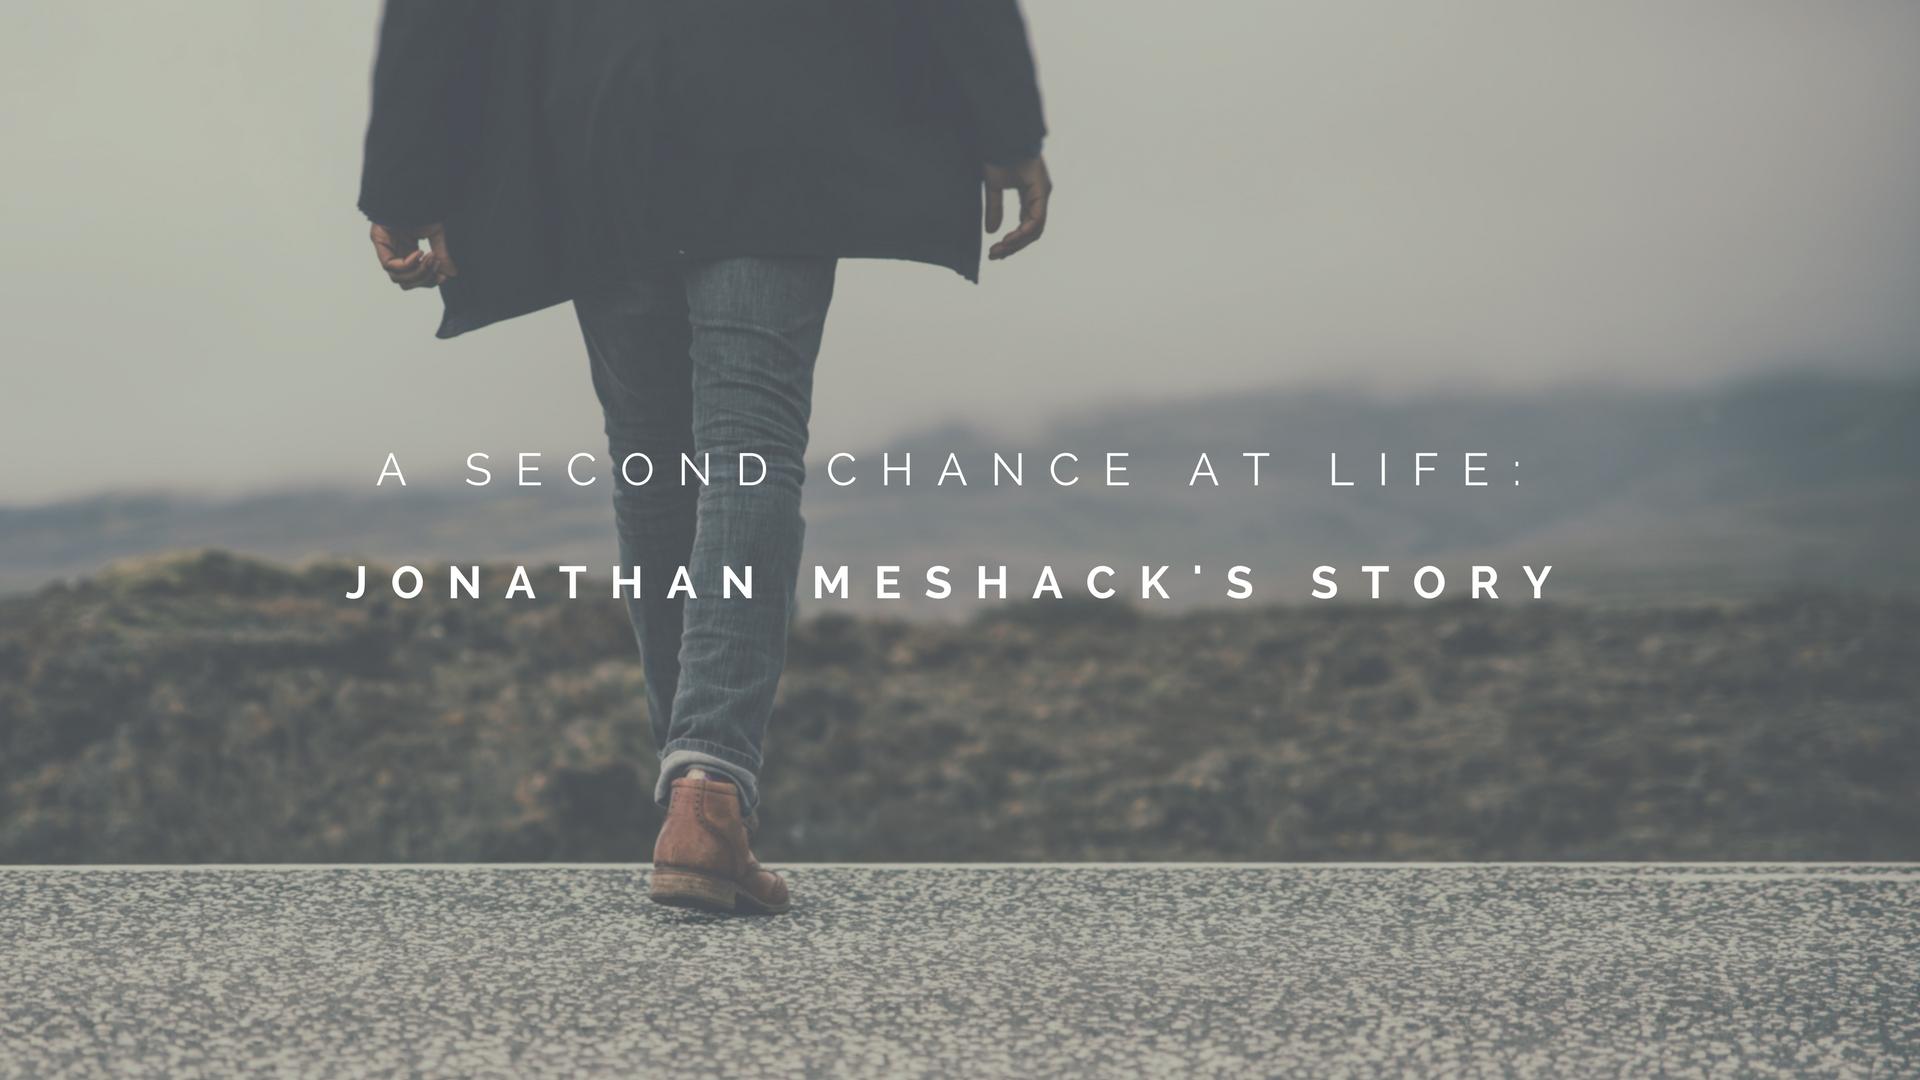 A Second Chance at Life: Jonathan Meshack's Story